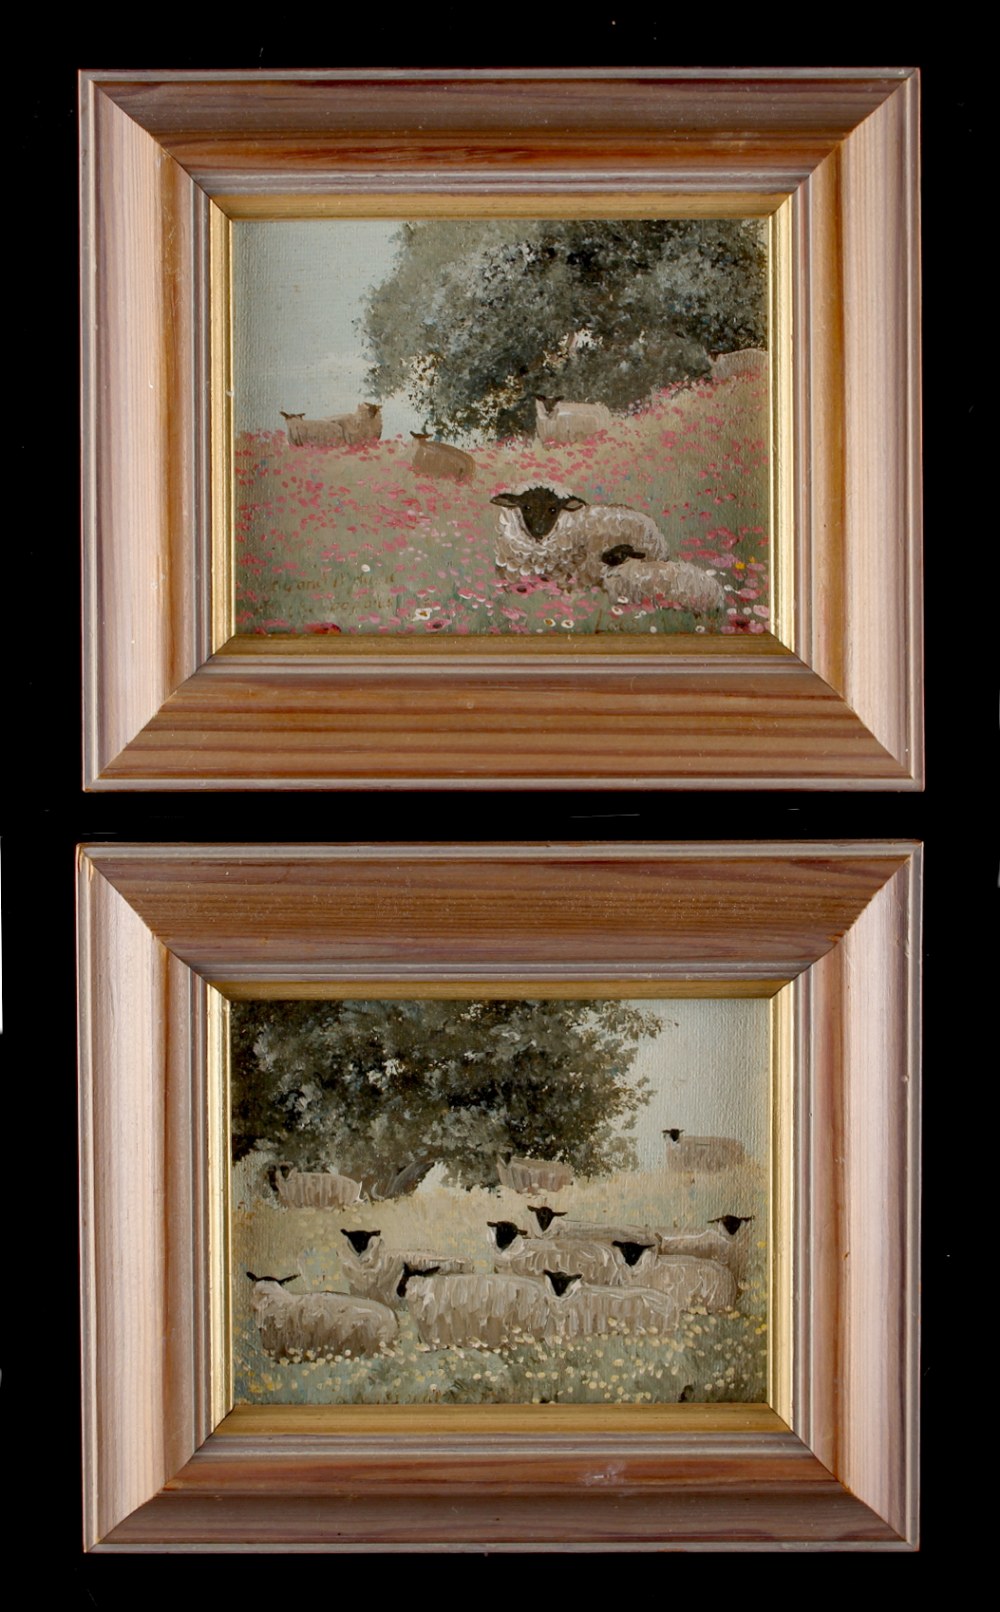 Property of a lady - modern British - SHEEP IN PASTURE - oils on board, a pair, each 4 by 5ins. (